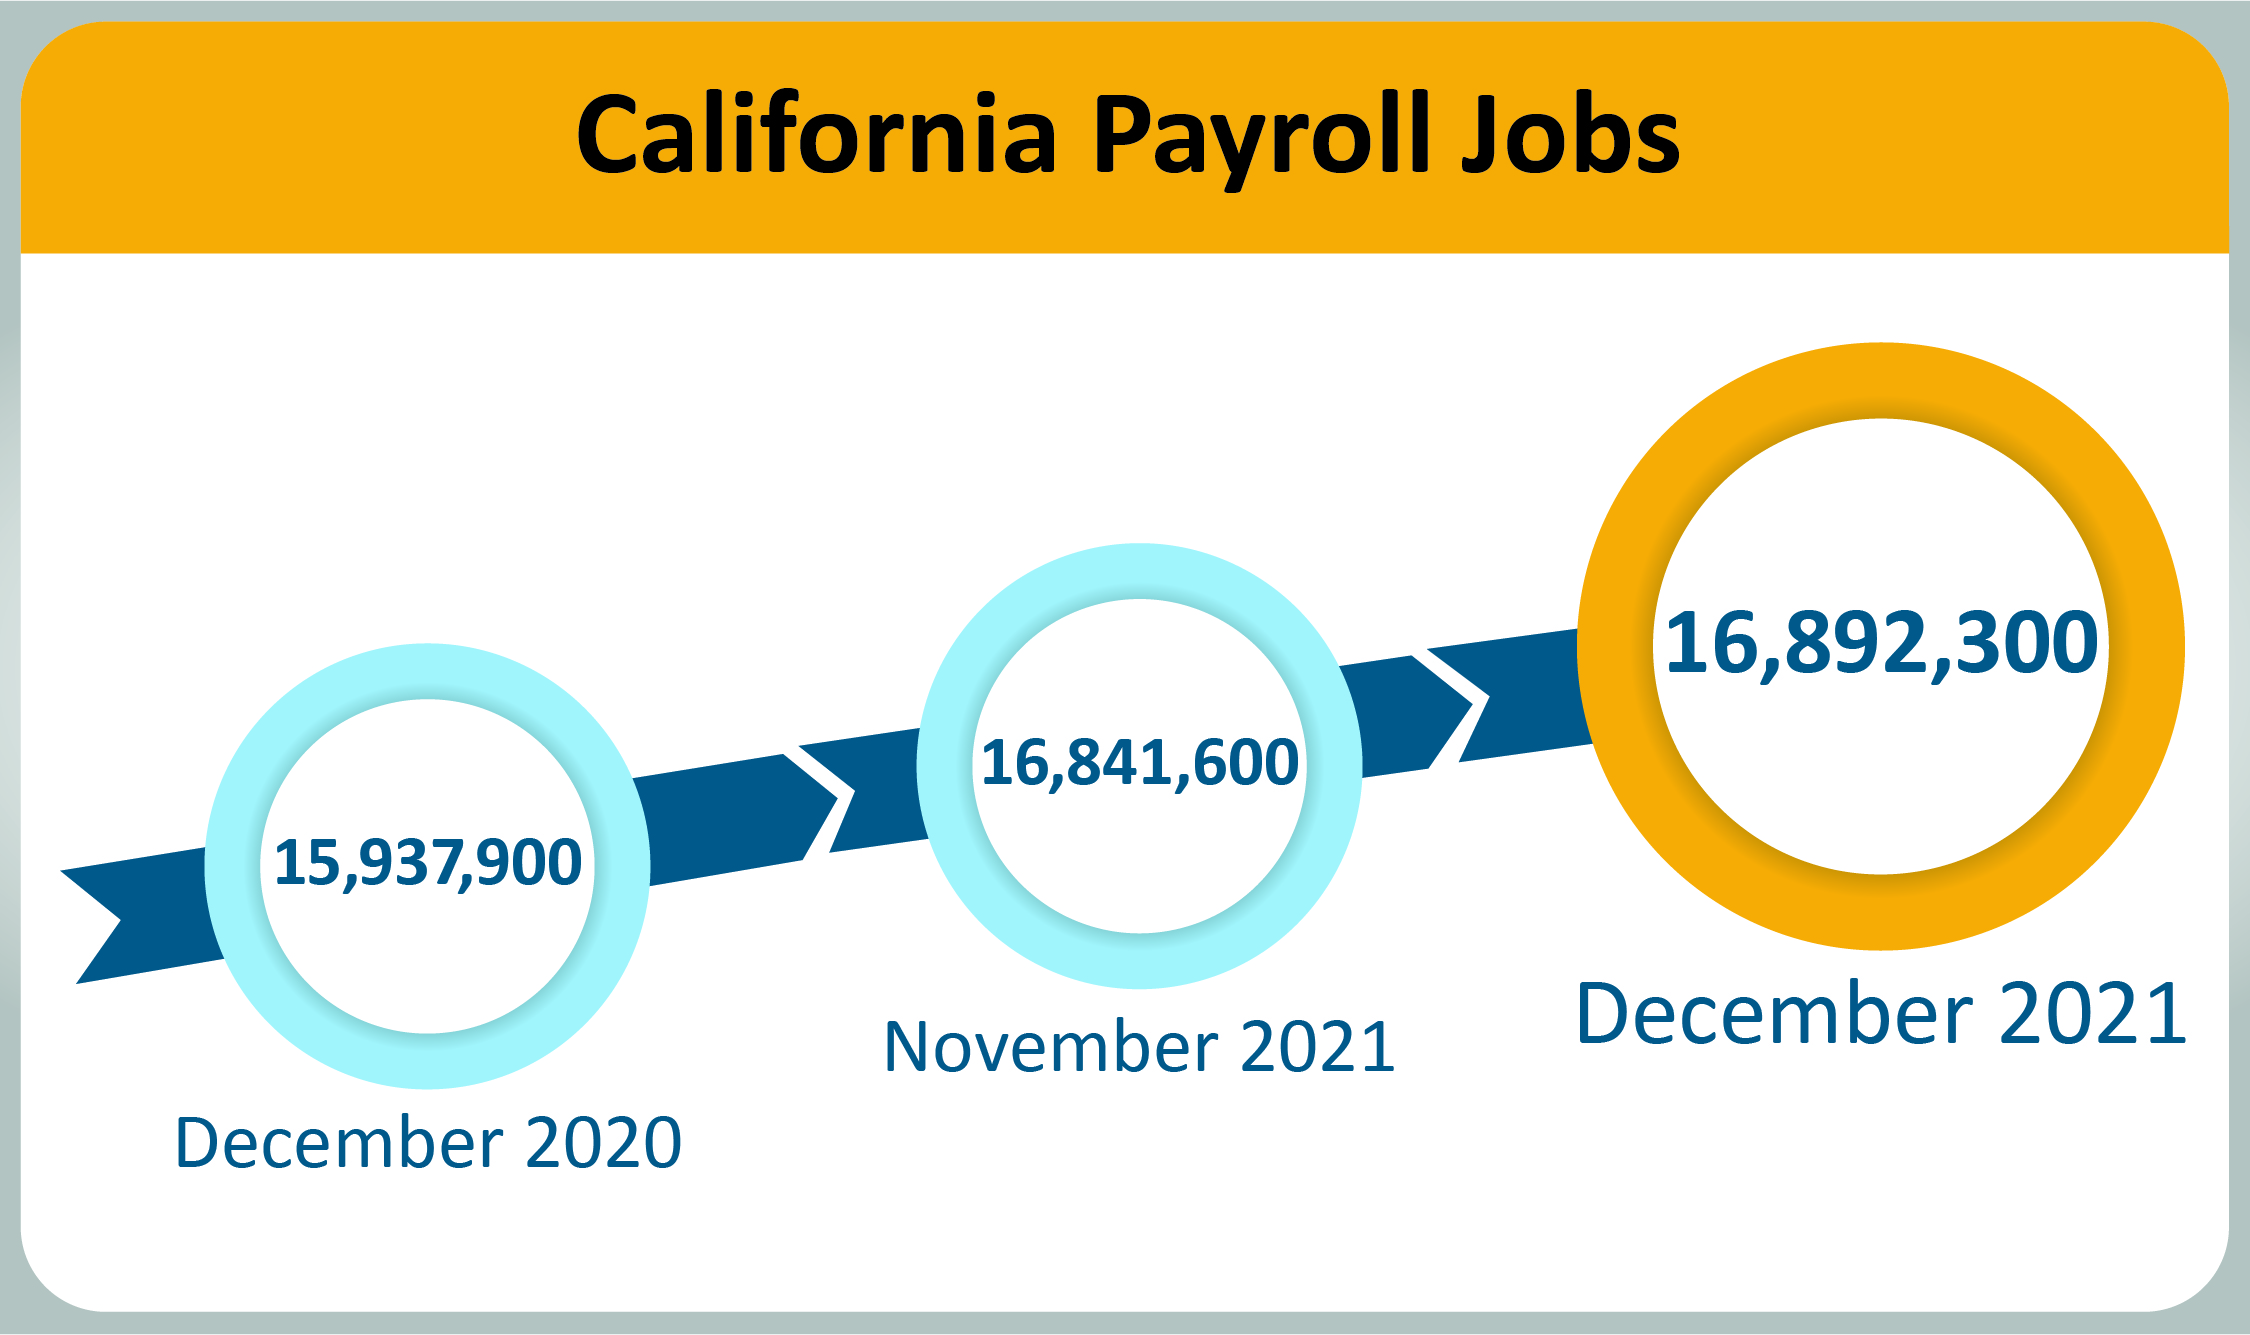 California payroll jobs totaled 16,892,300 in December 2021, up from 15,937,900 in December 2020.